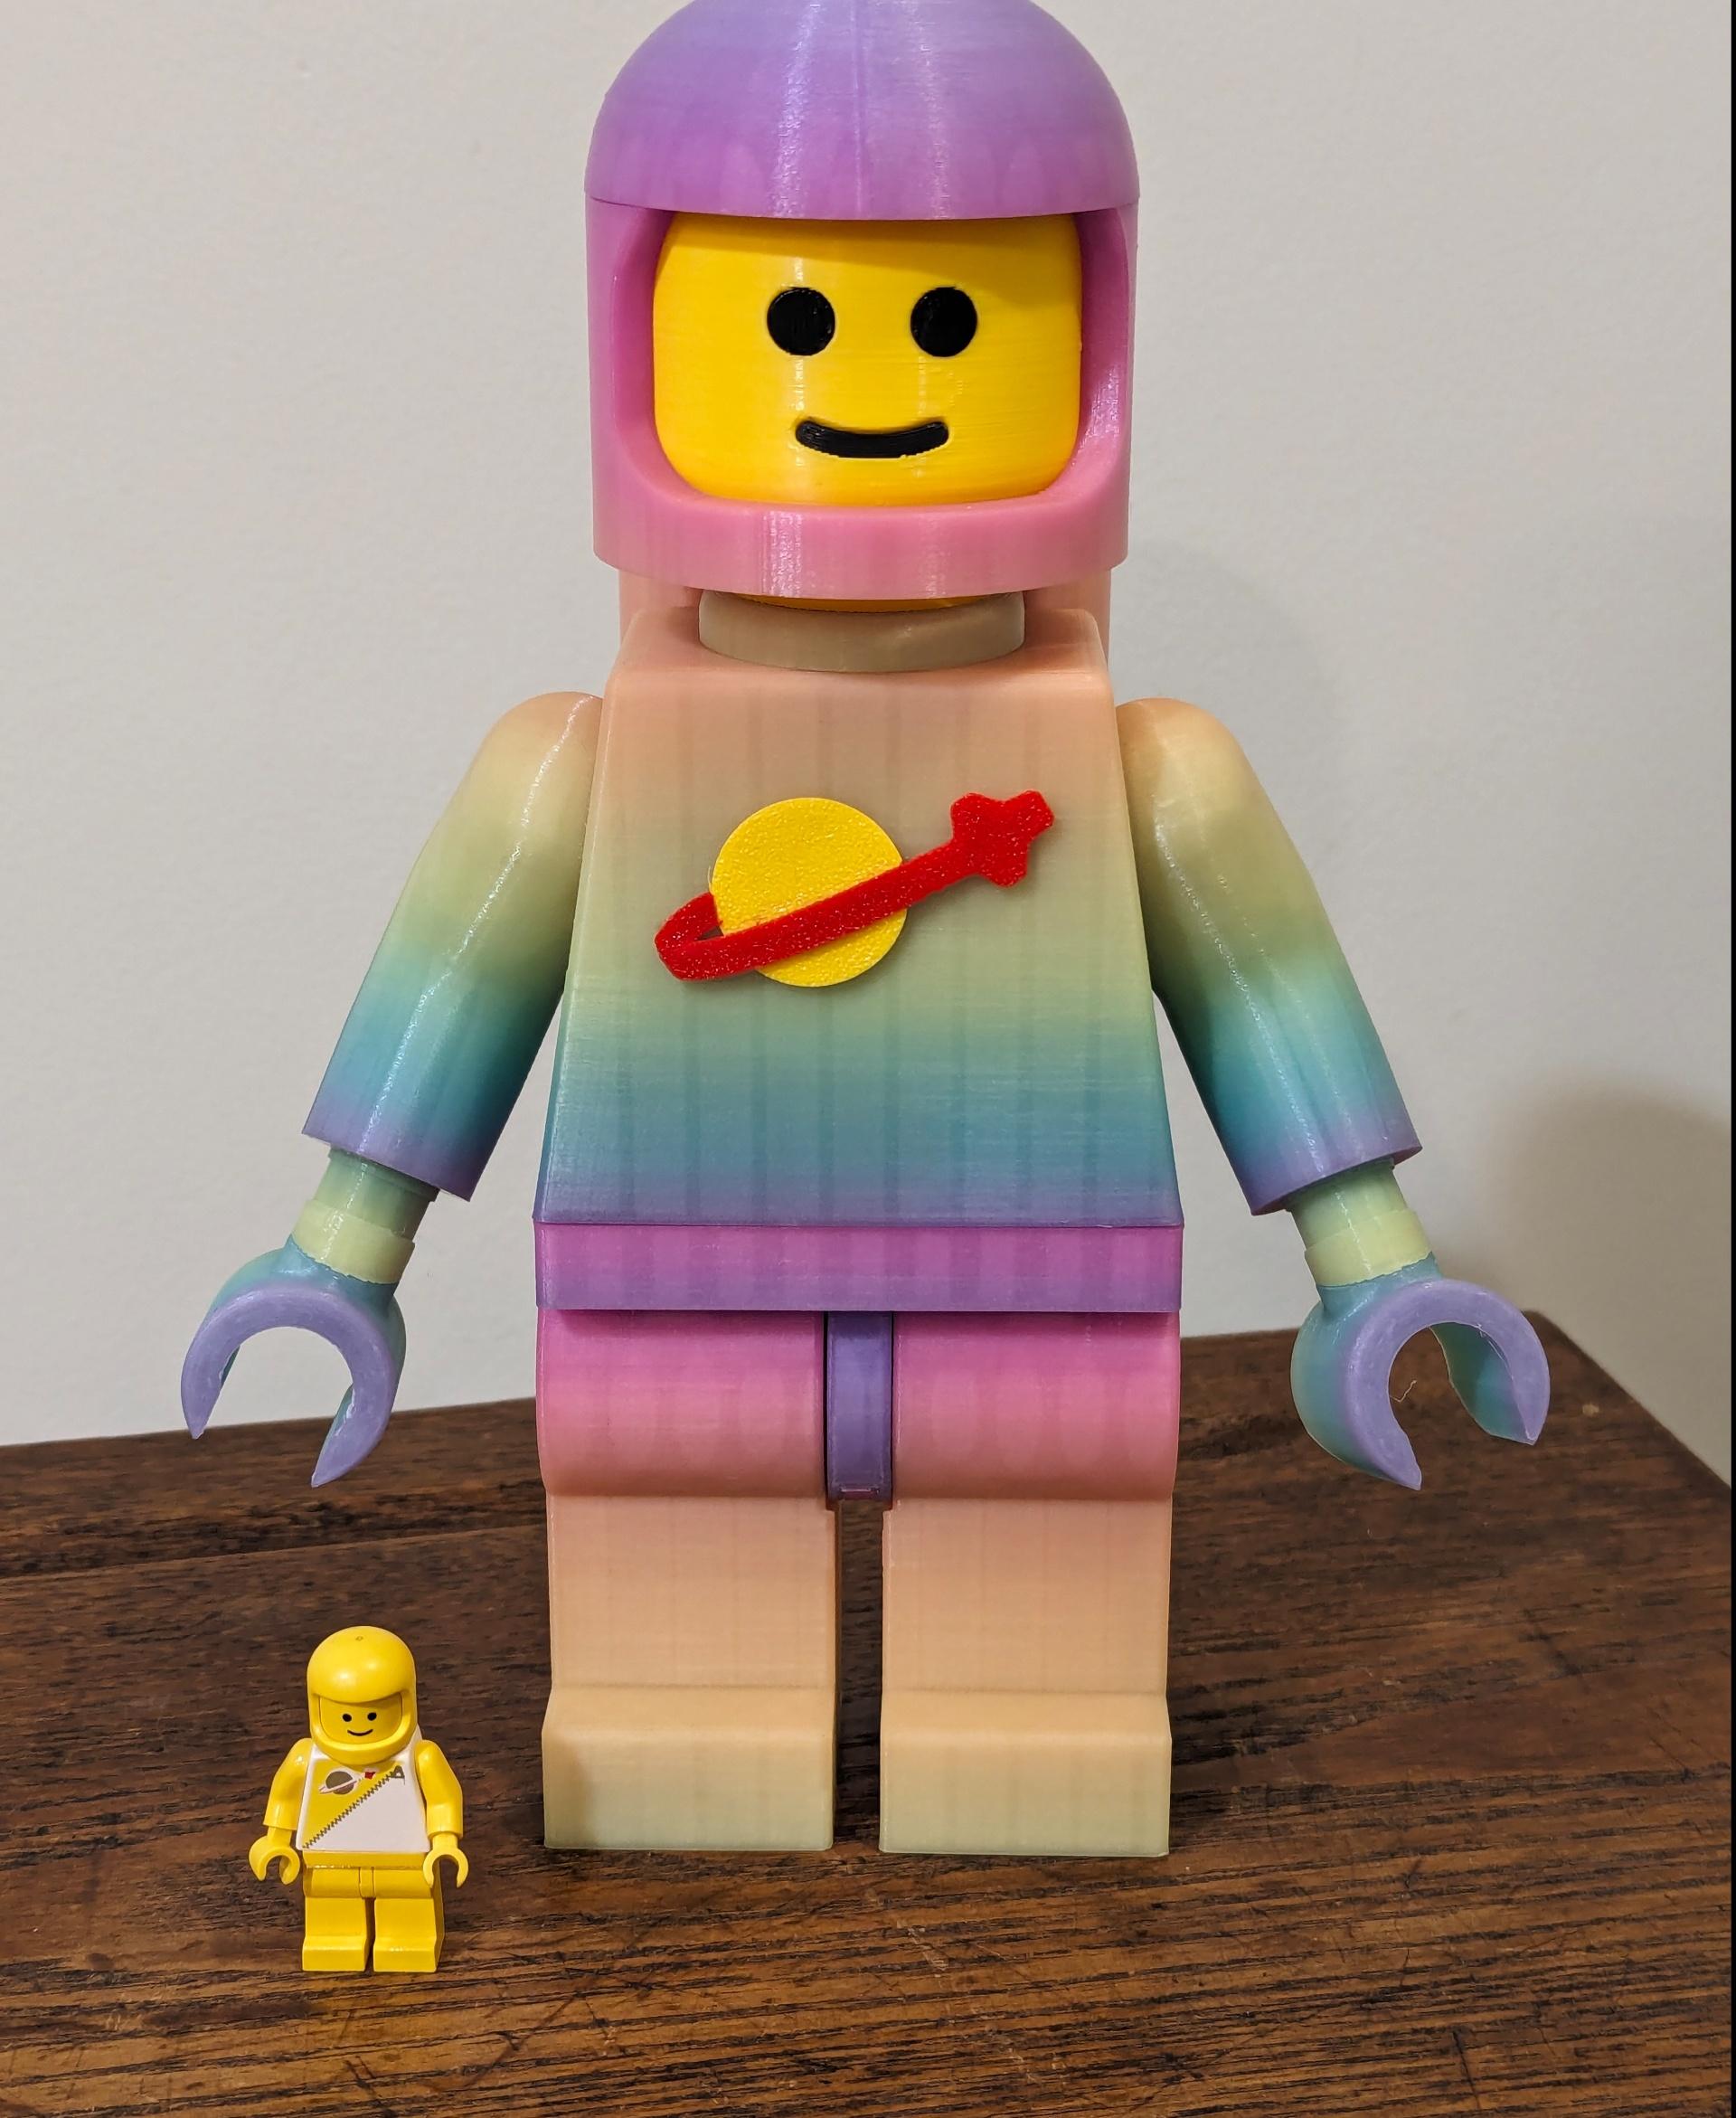 Classic Spaceman (6:1 LEGO-inspired brick figure, NO MMU/AMS, NO supports, NO glue) - Printed in
- Polymaker_3D PolyLite Luminous Rainbow, Red, and Black
- Coex3D Taxicab Yellow - 3d model